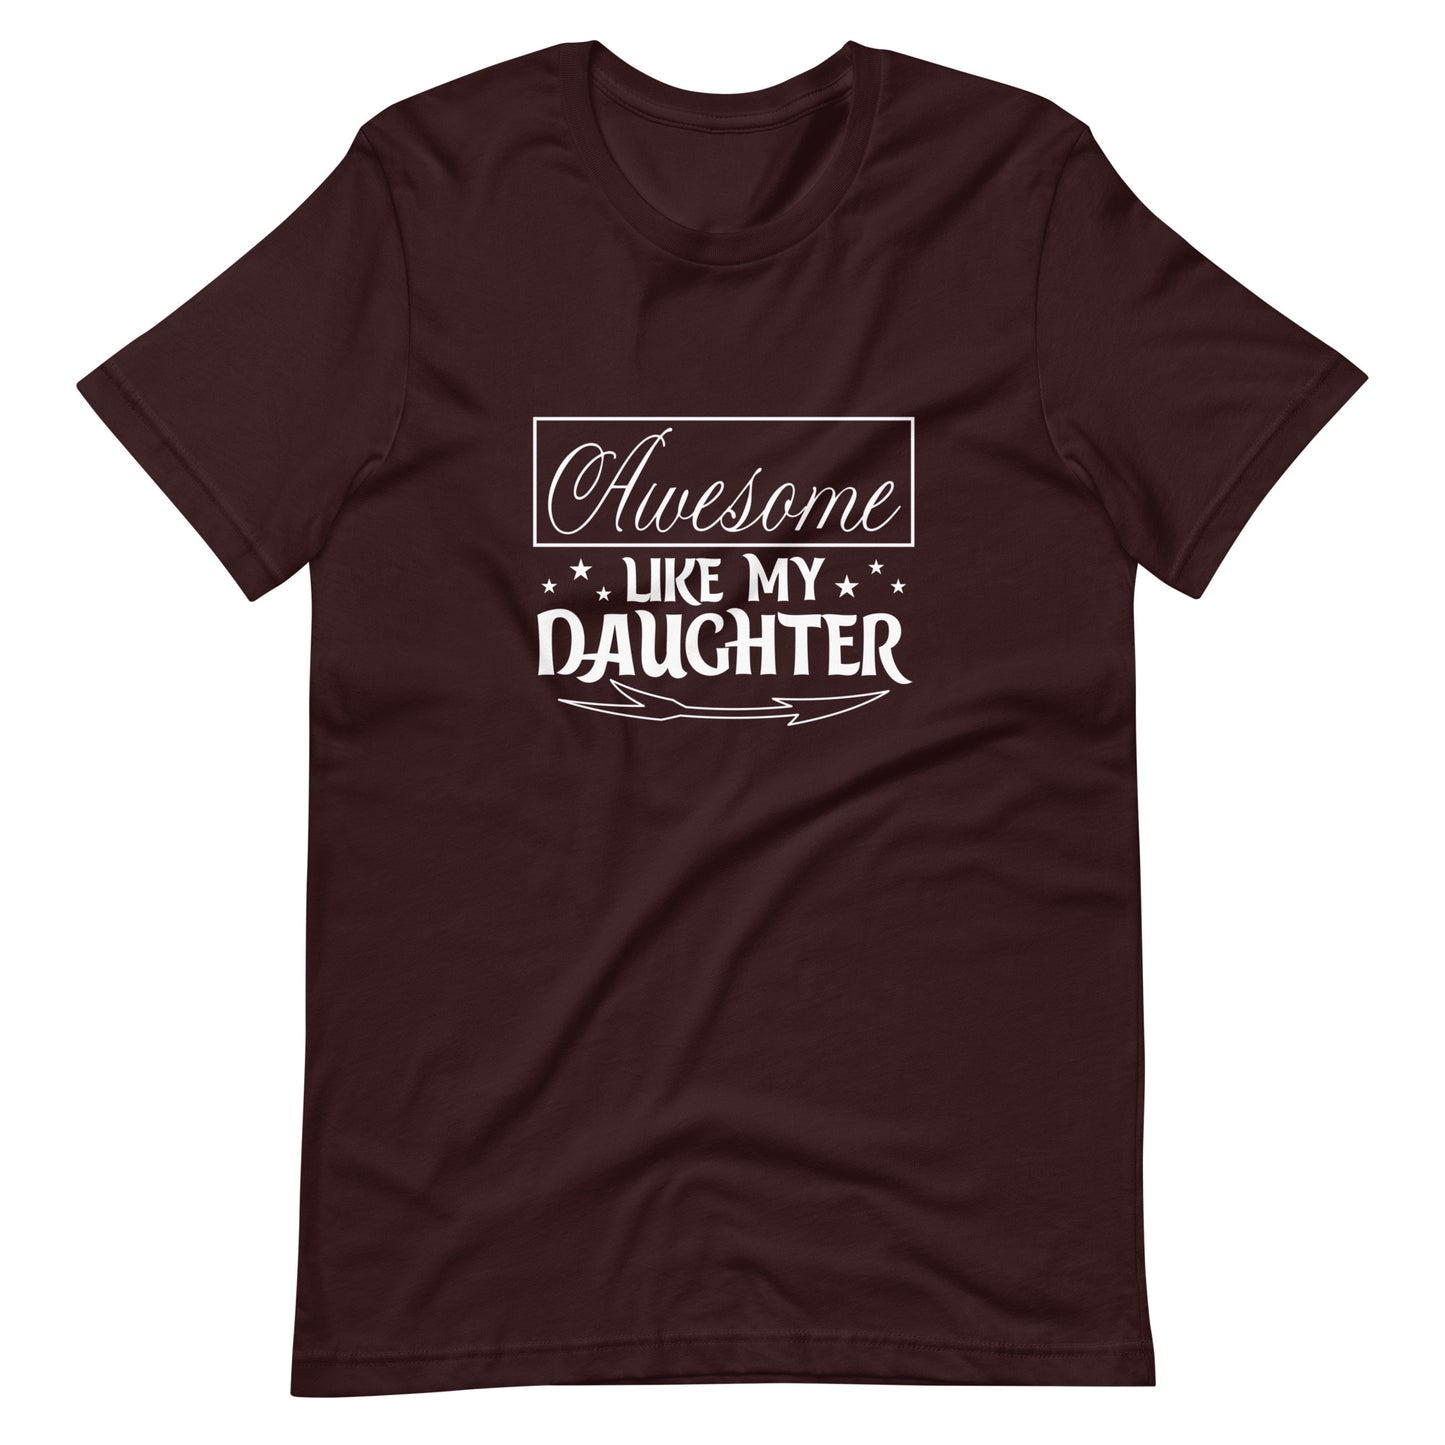 Awesome Like My Daughter Tshirt